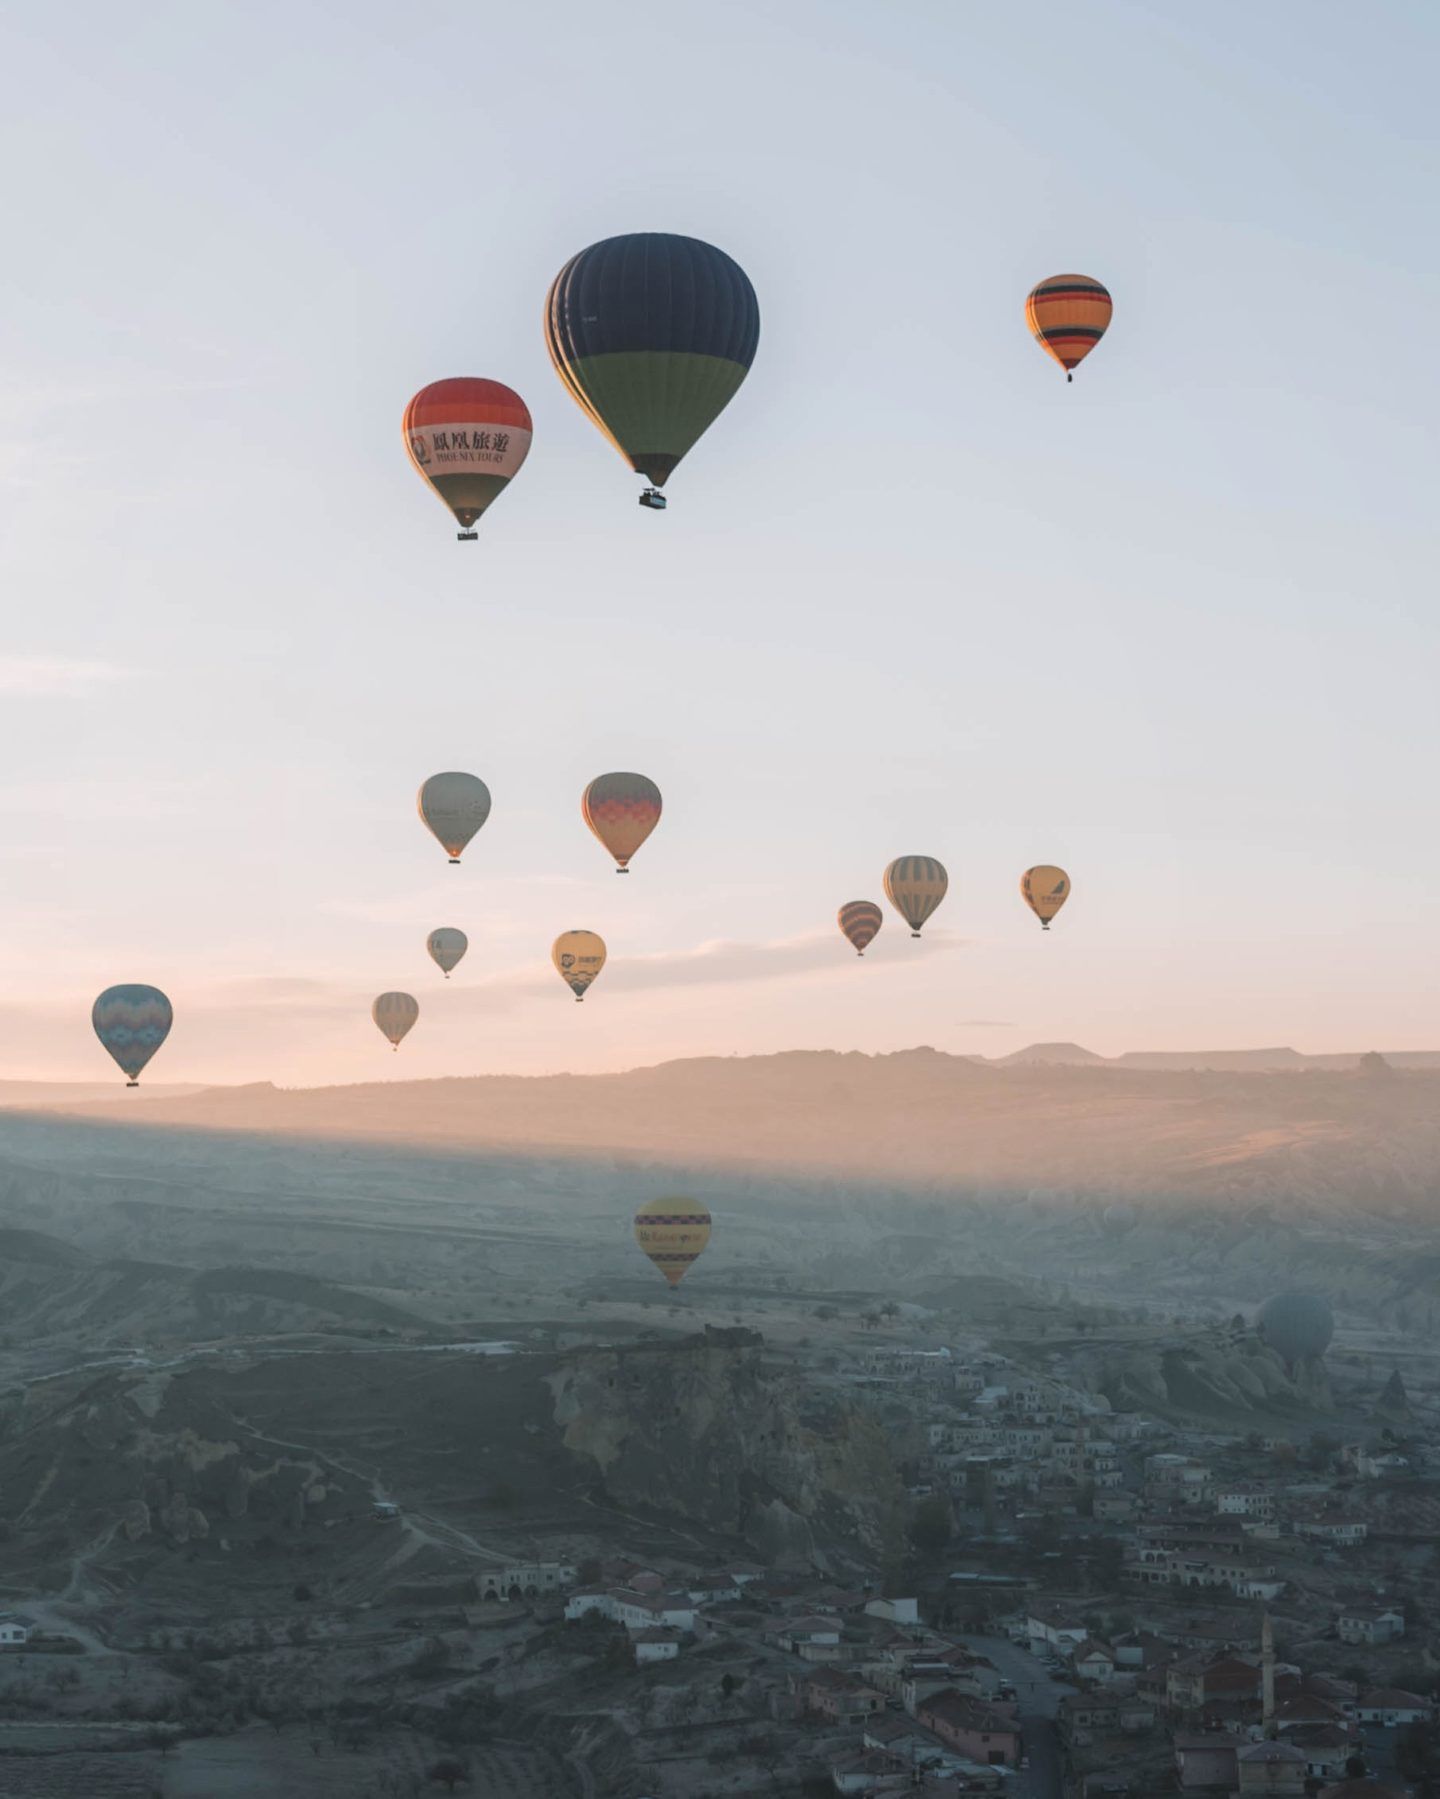 Are you dreaming about ride a hot air balloon in Cappadocia?